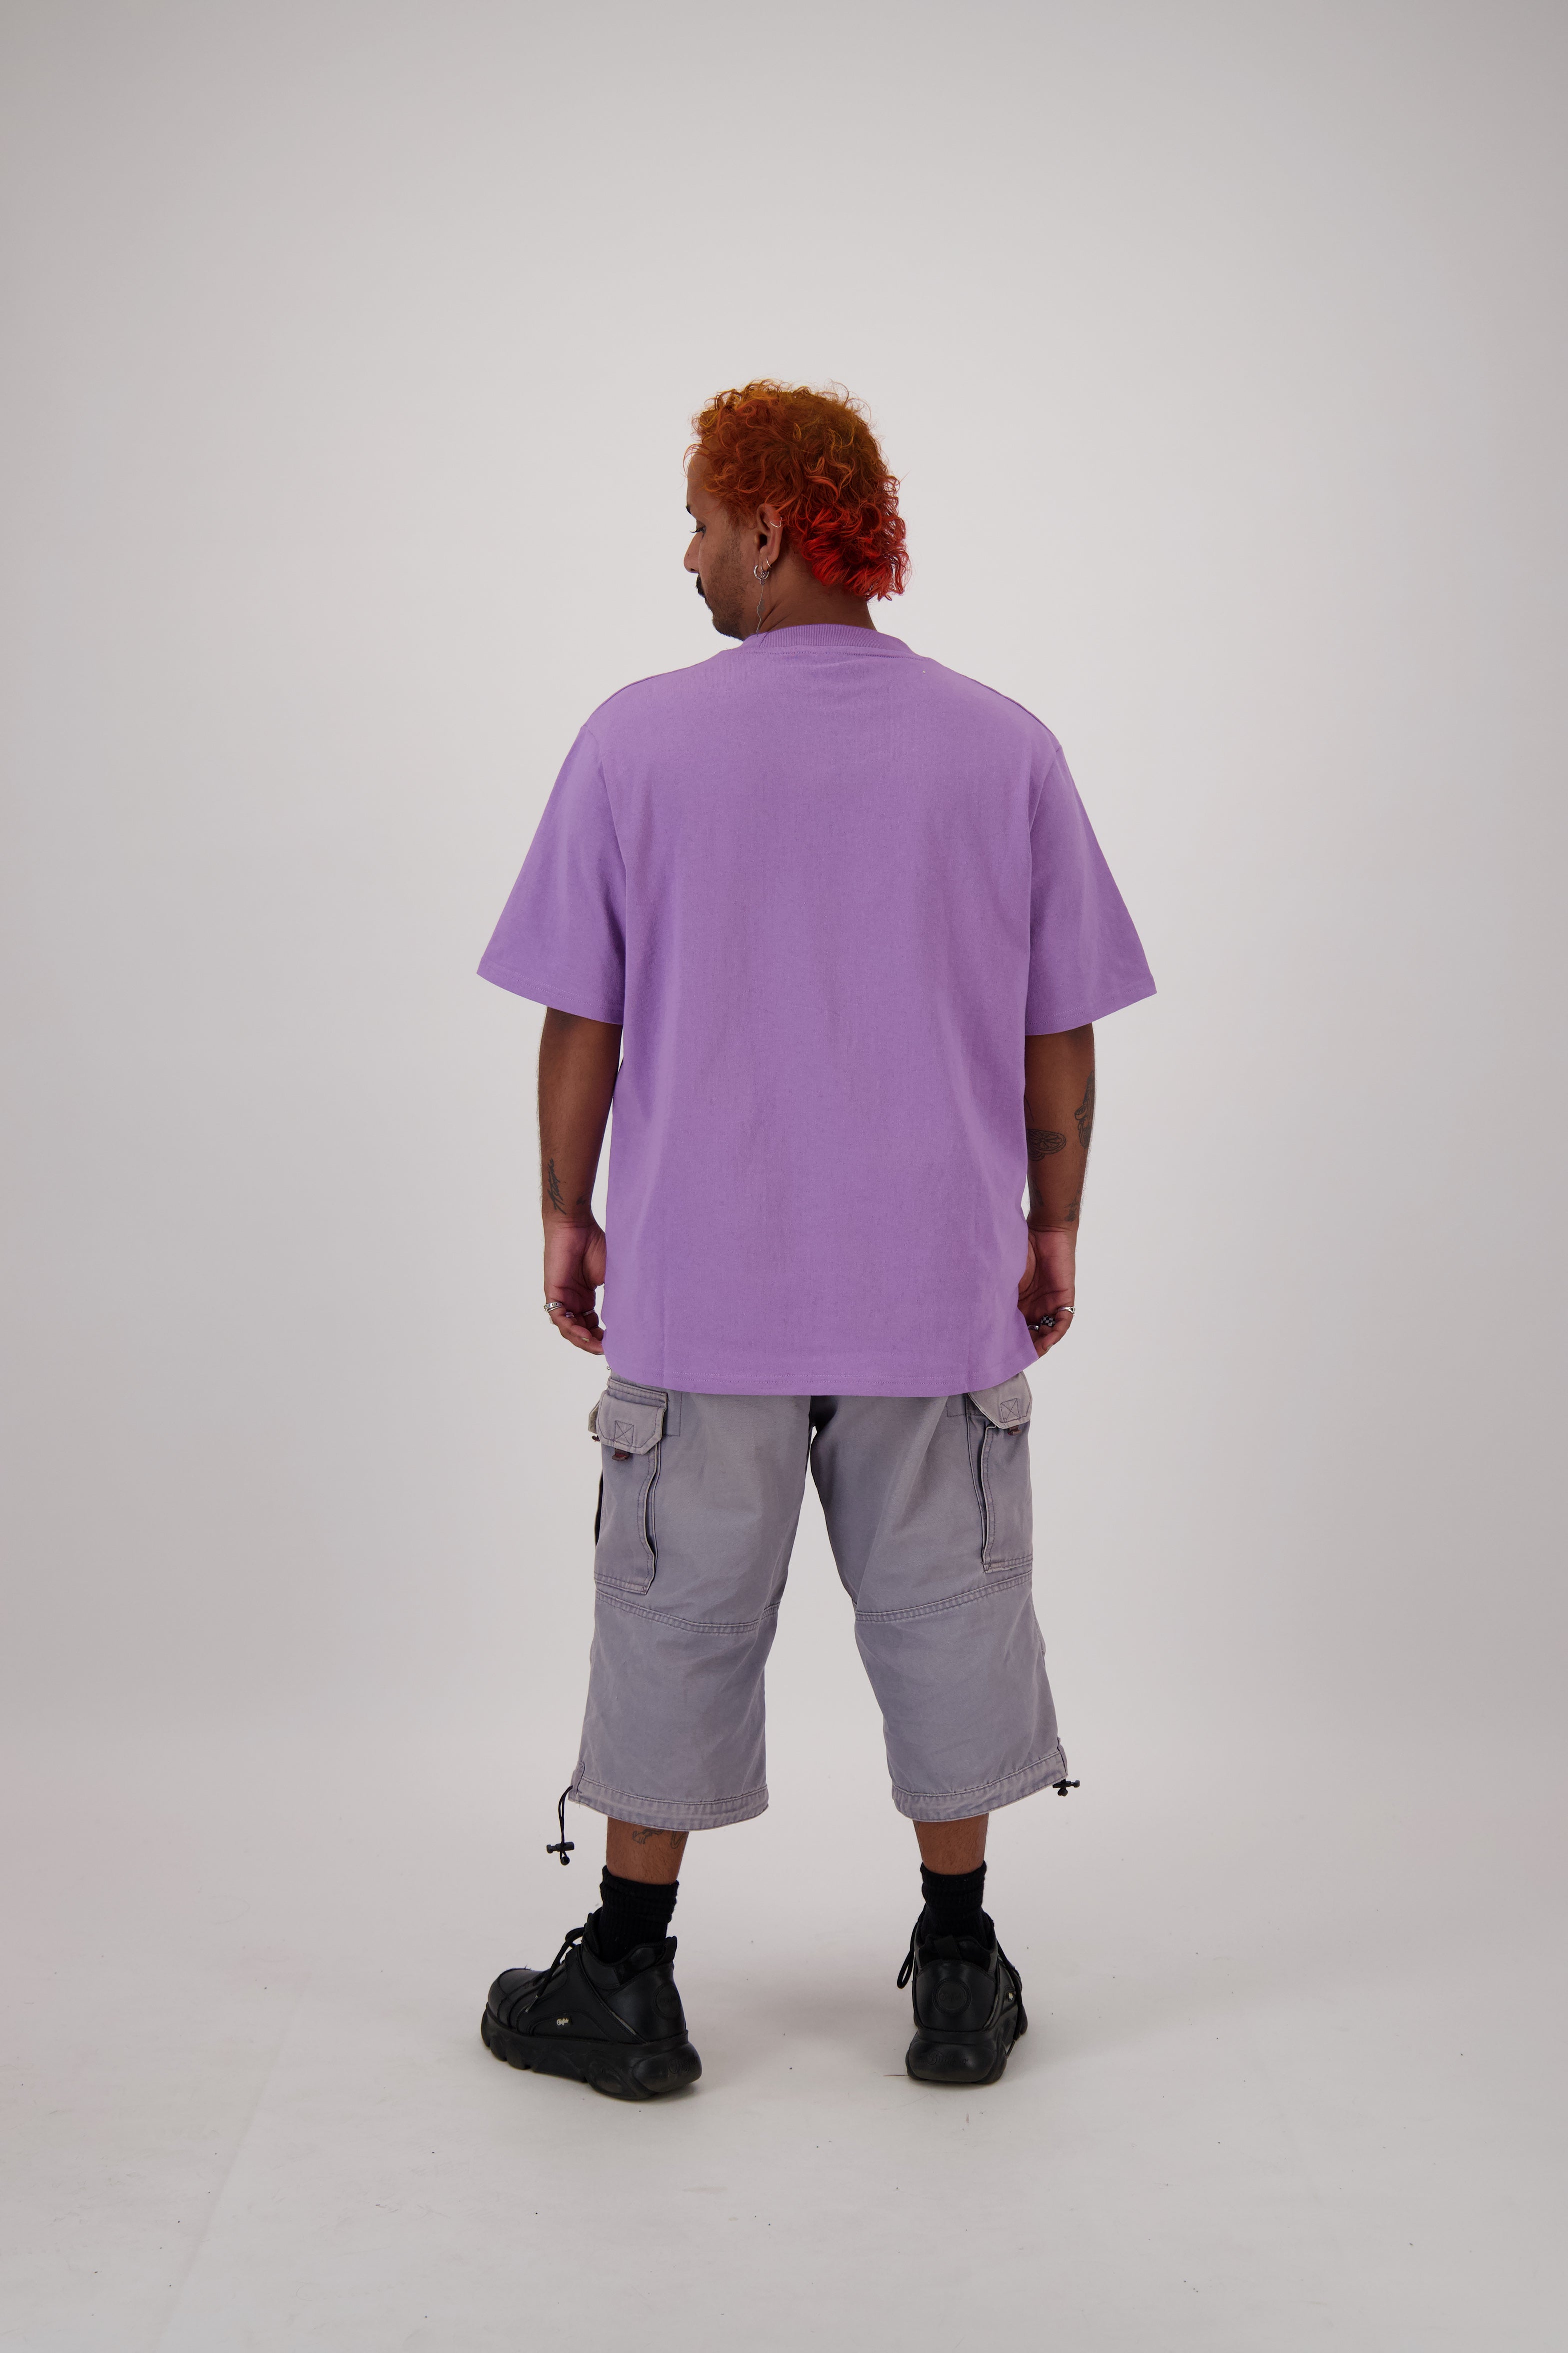 Heavy Weight Tee - Lilac